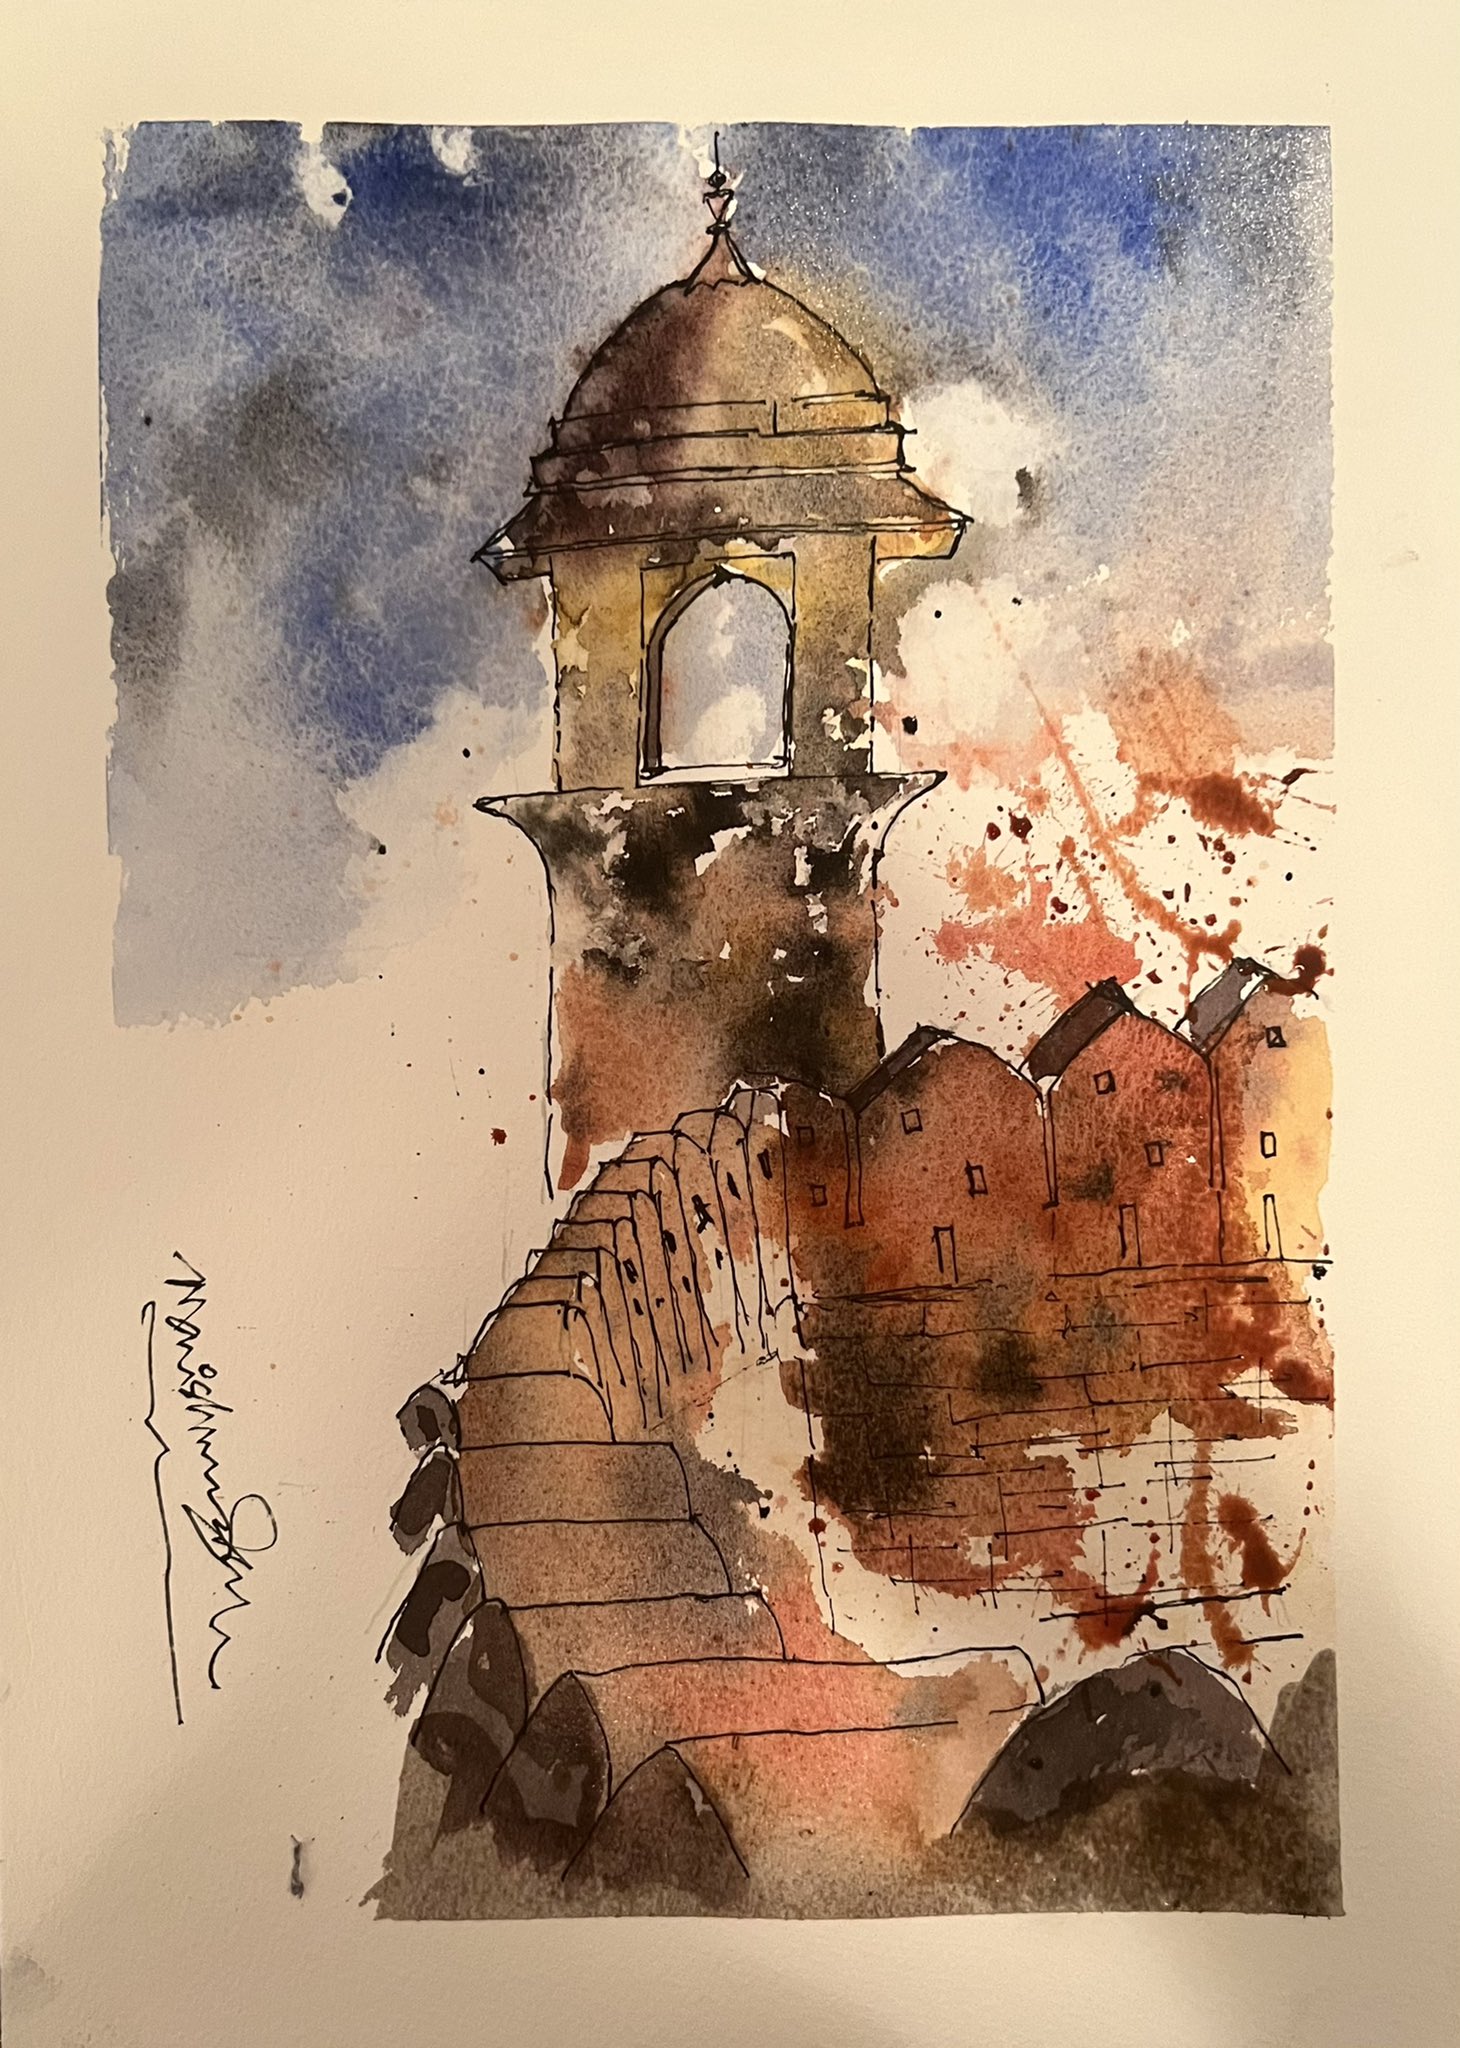 Manish Mundra on X: Hope you like this watercolor painting done